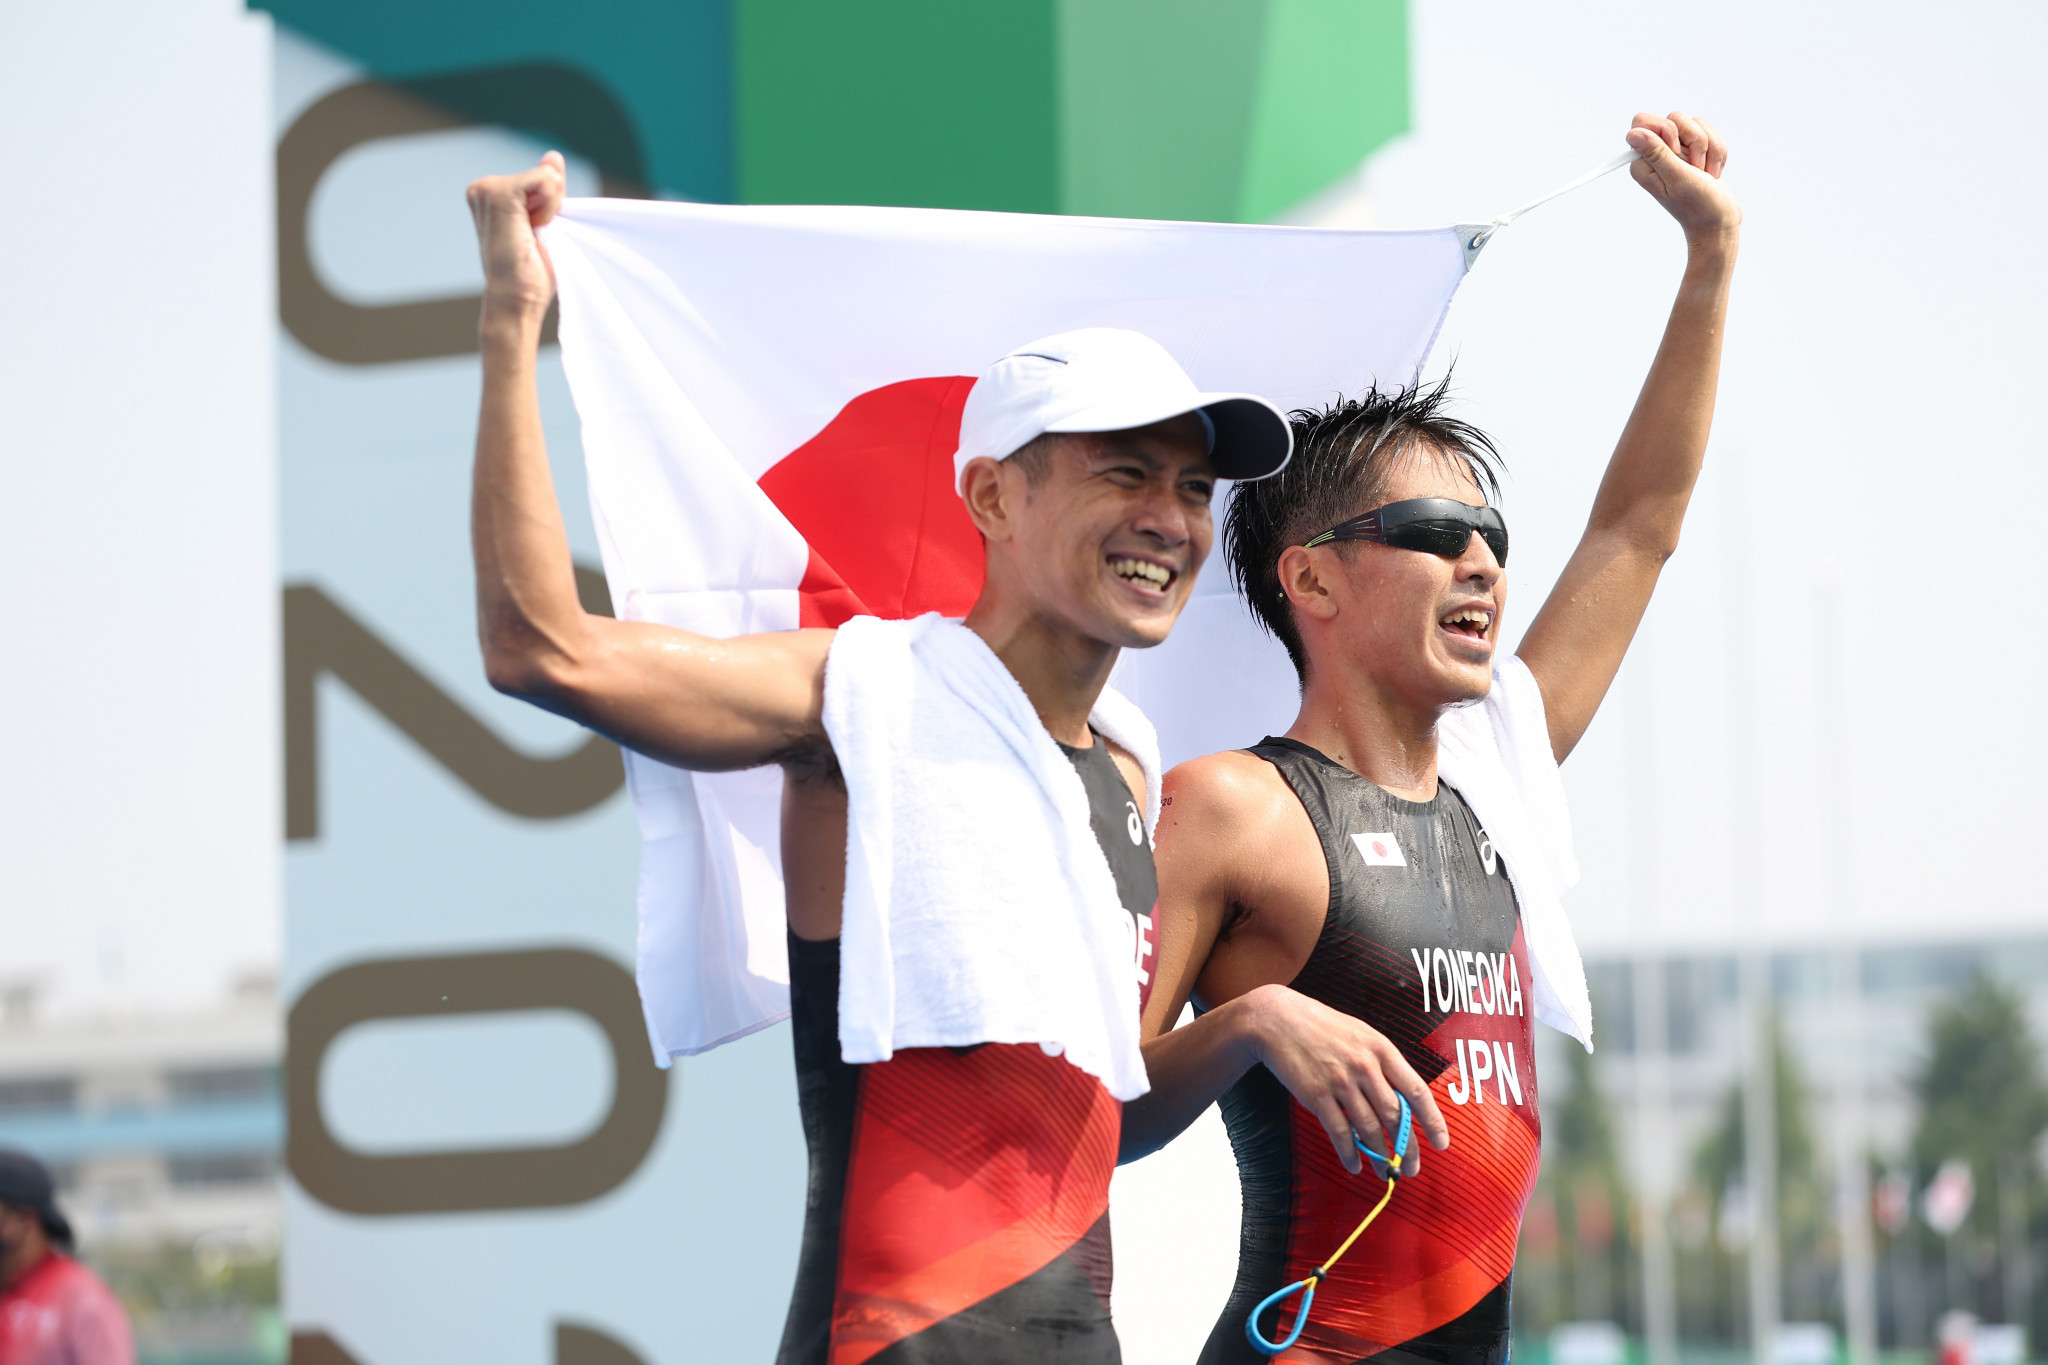 Japan was able to celebrate medal success in Para-triathlon ©Getty Images